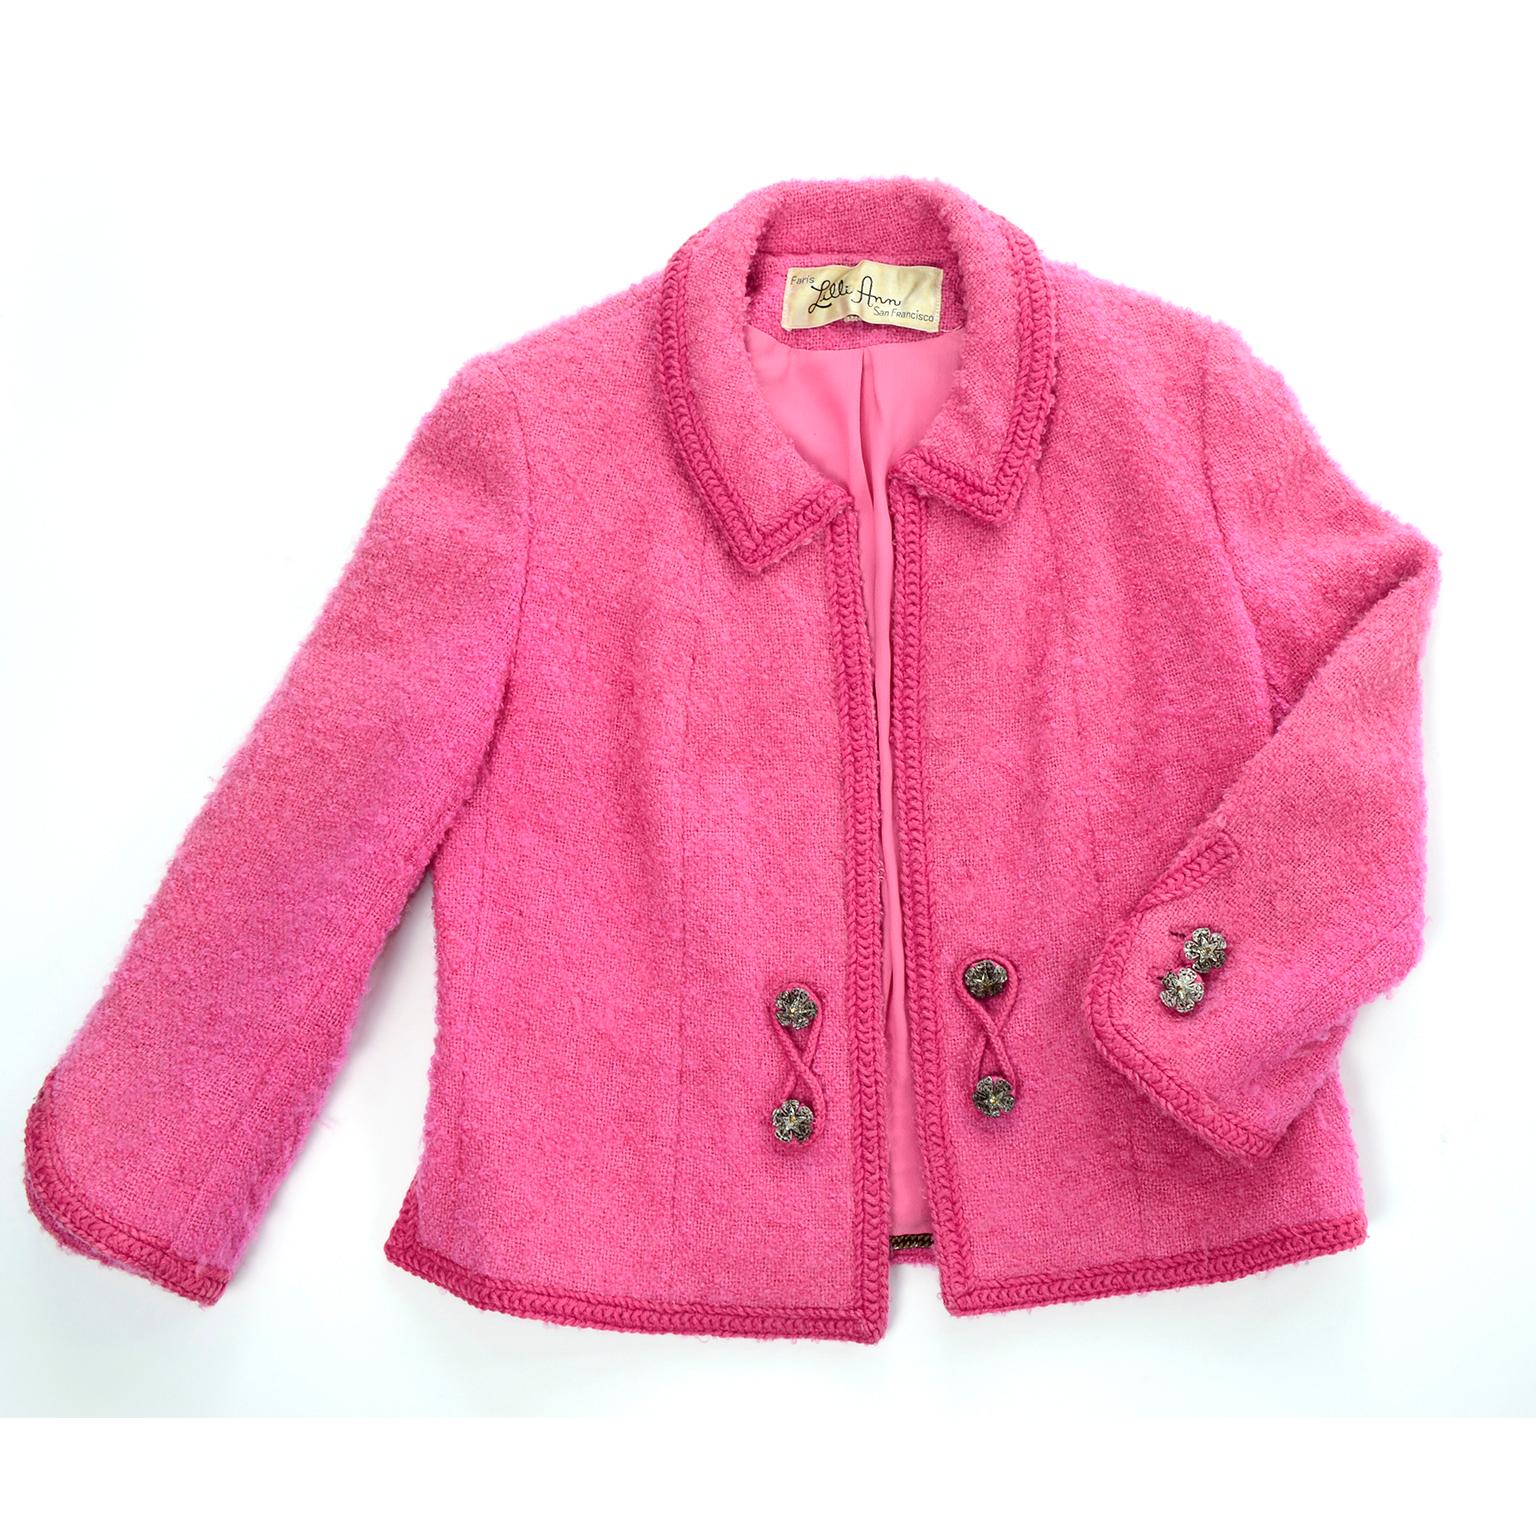 Women's Lilli Ann Vintage 1960s Hot Pink Wool Boucle Jacket W Chain Hem and Skirt Suit 